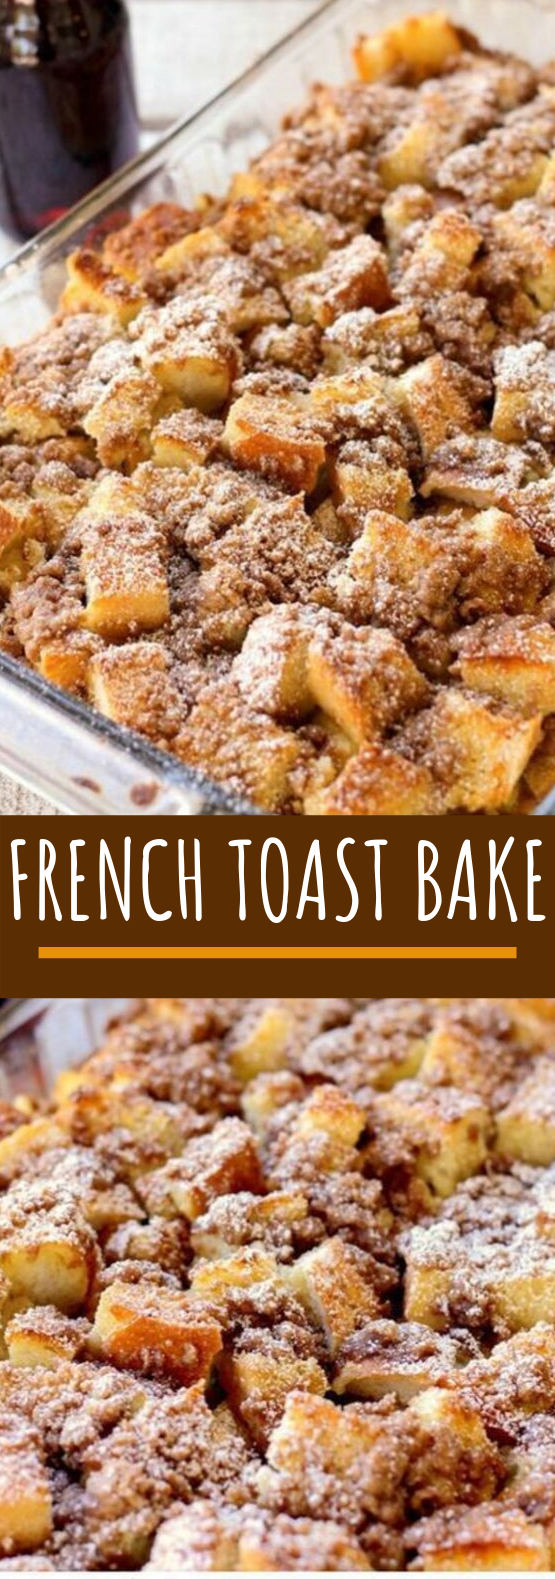 Overnight French Toast Bake #breakfast #lunch